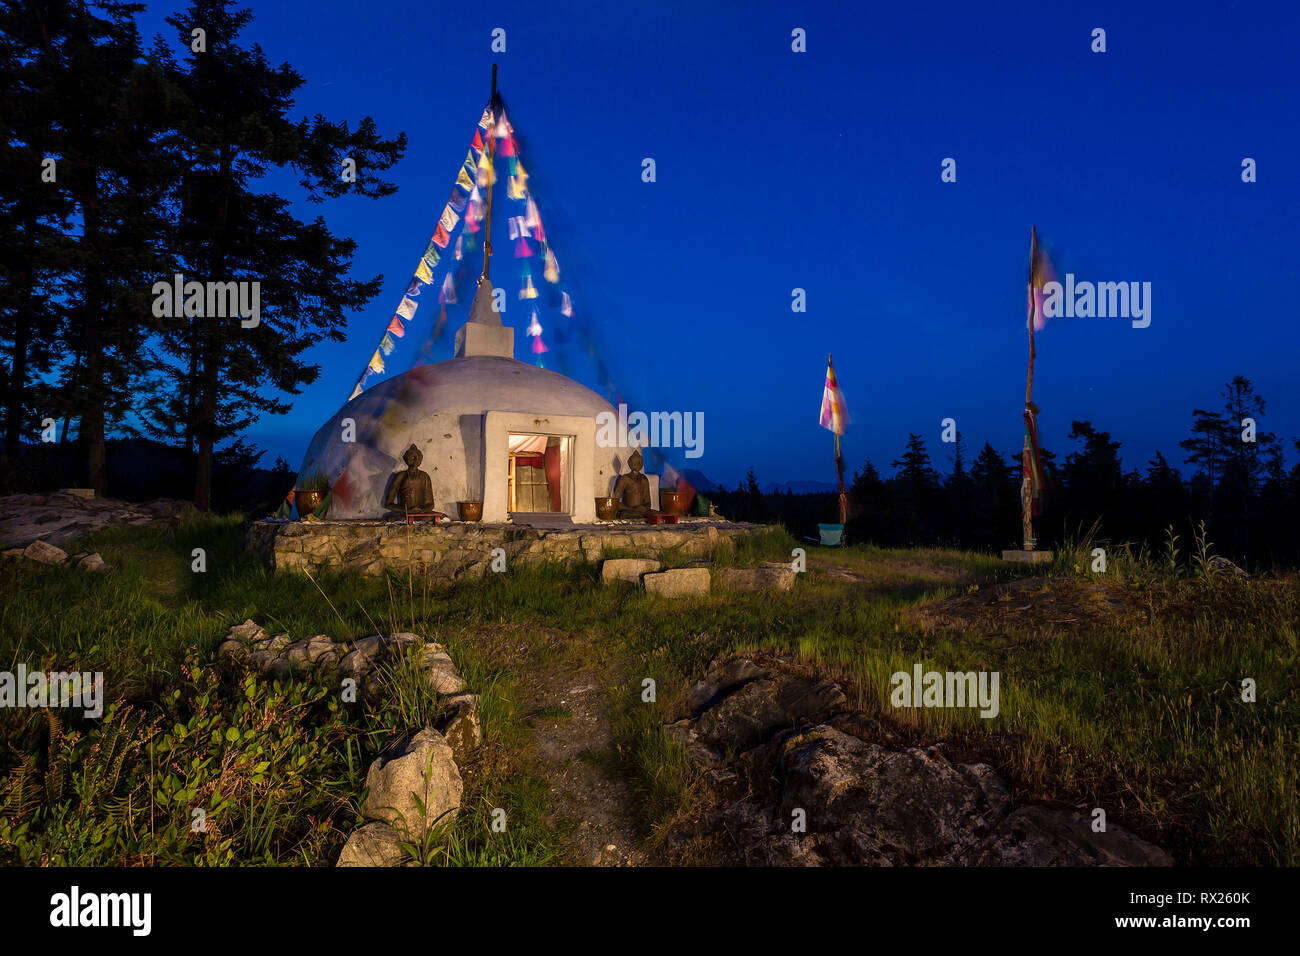 A Buddhist Stupa with prayer flags blowing in the wind are lit up at night at a retreat on Cortes Island,  Cortes Island, British Columbia, Canada Stock Photo